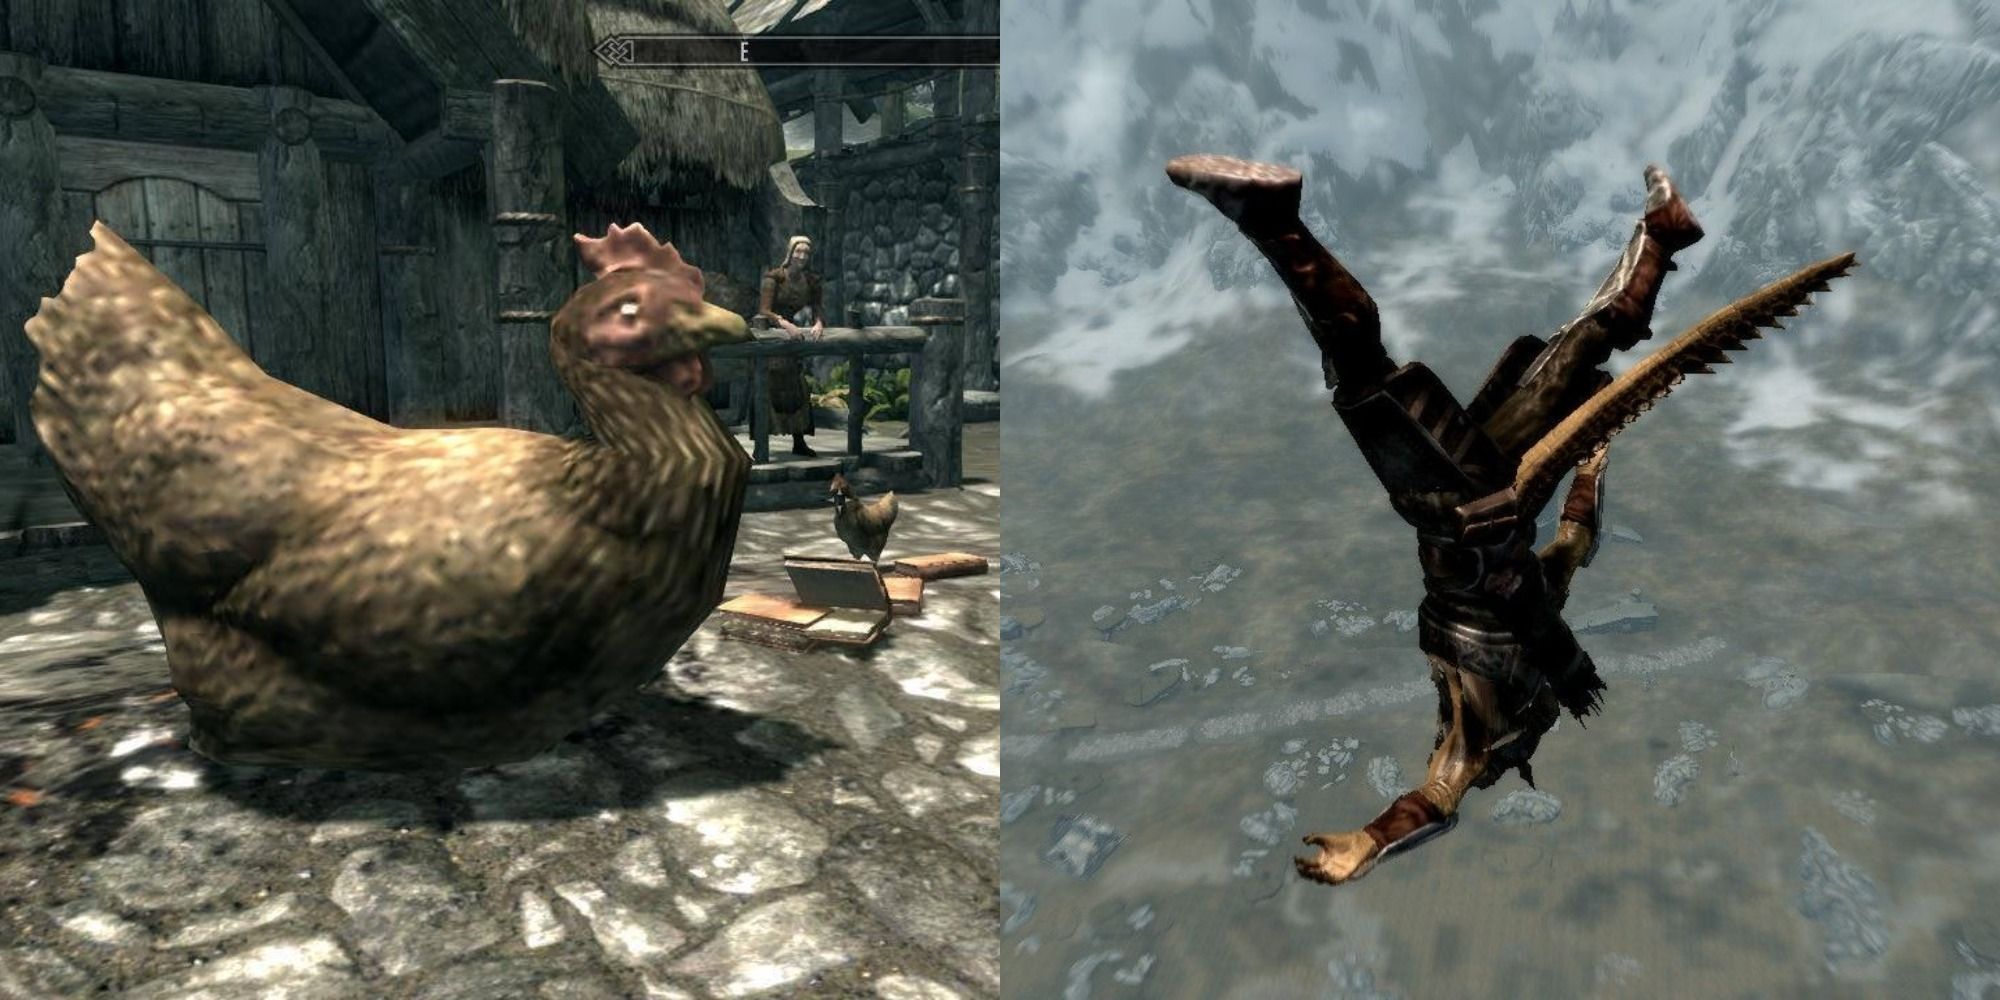 Skyrim Funniest Events — Riverwood Chicken and Giant Club Smash Featured Image